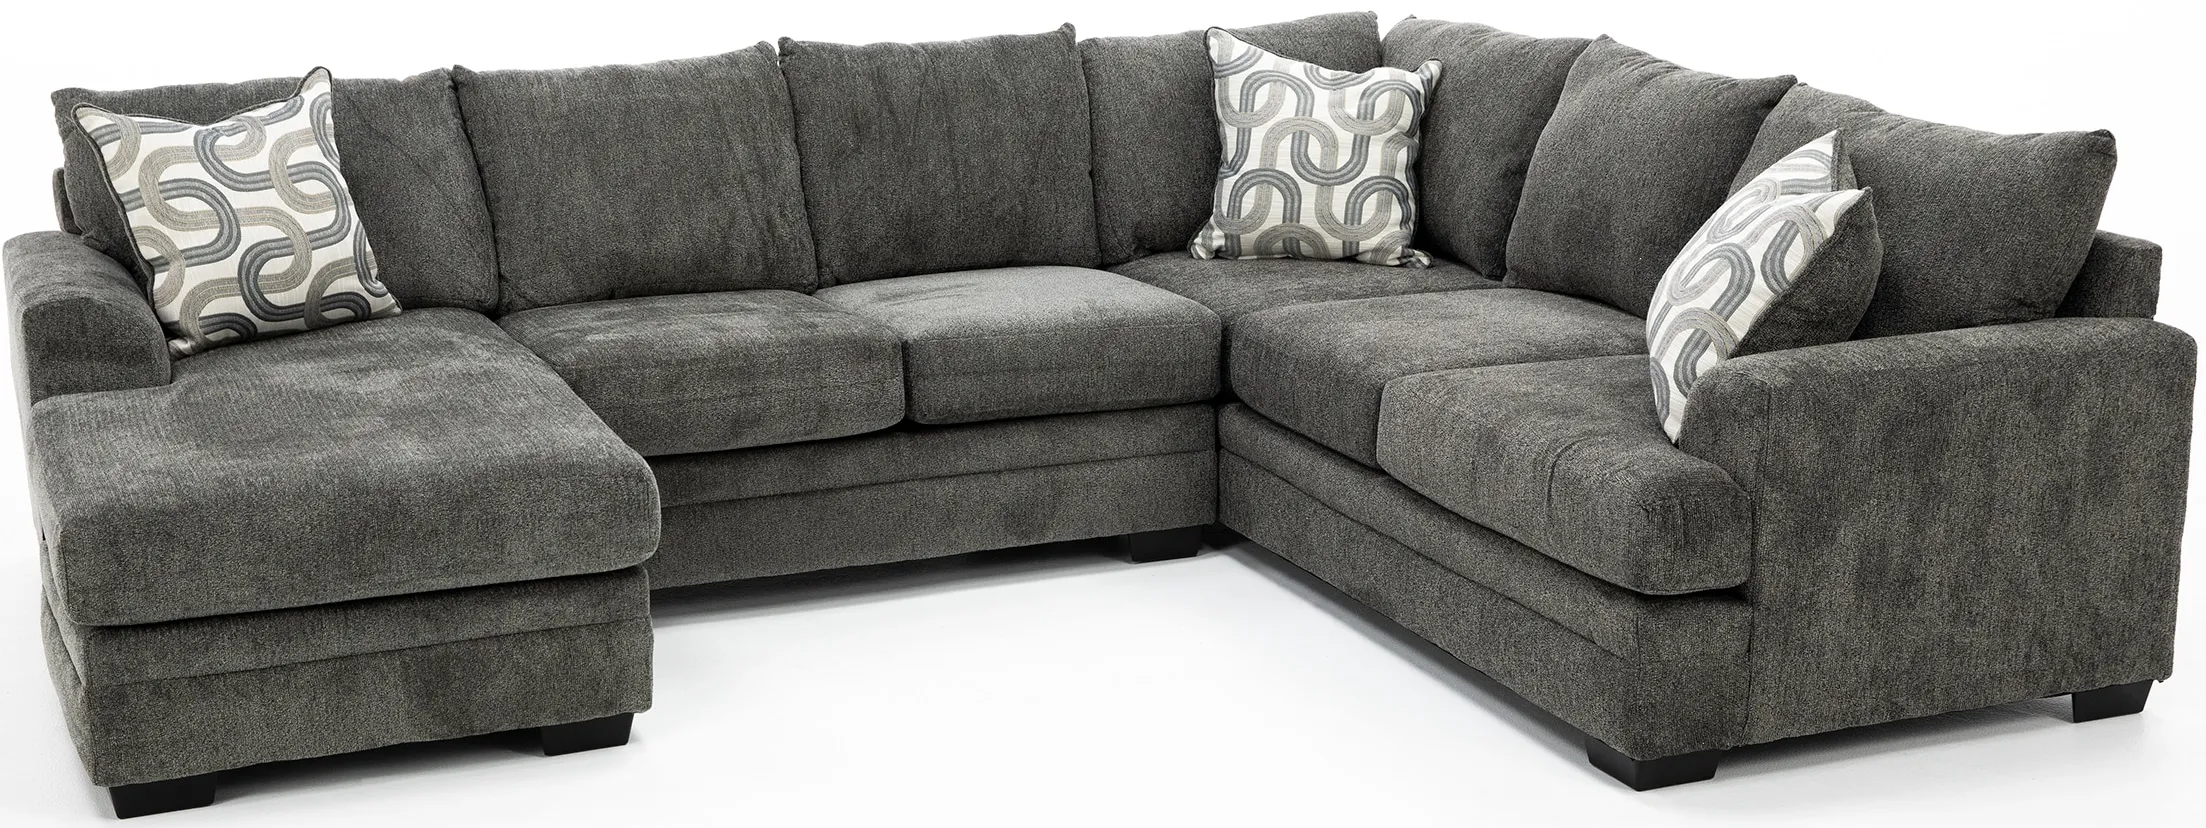 Delta 2-Pc. Sectional in Charcoal